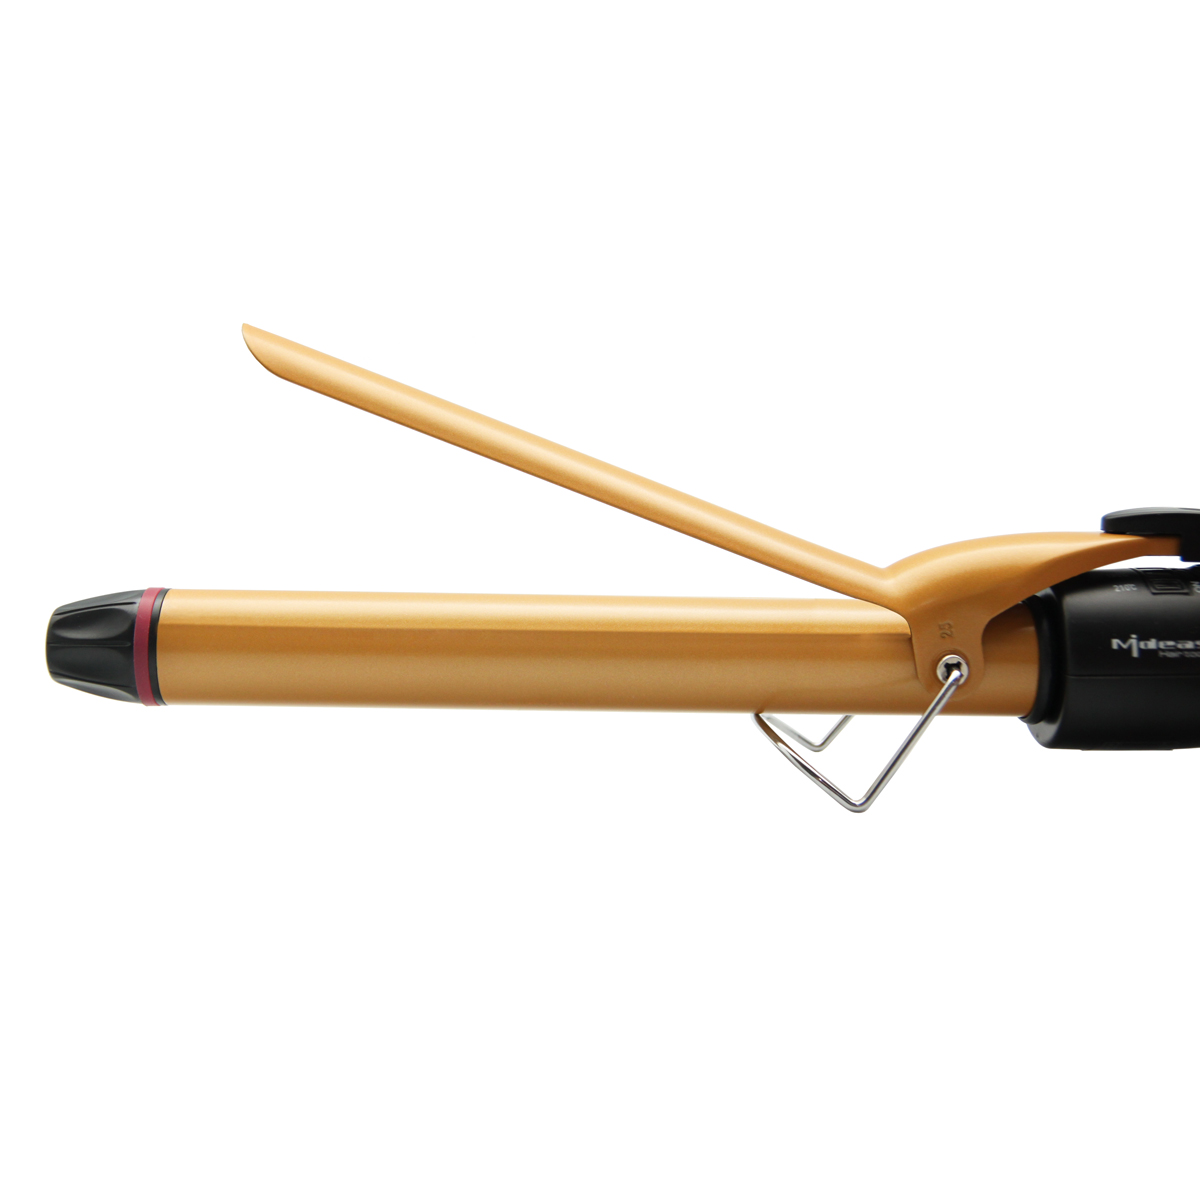 Mideas – F998B Professional Hair Curling Iron – Gold (2)